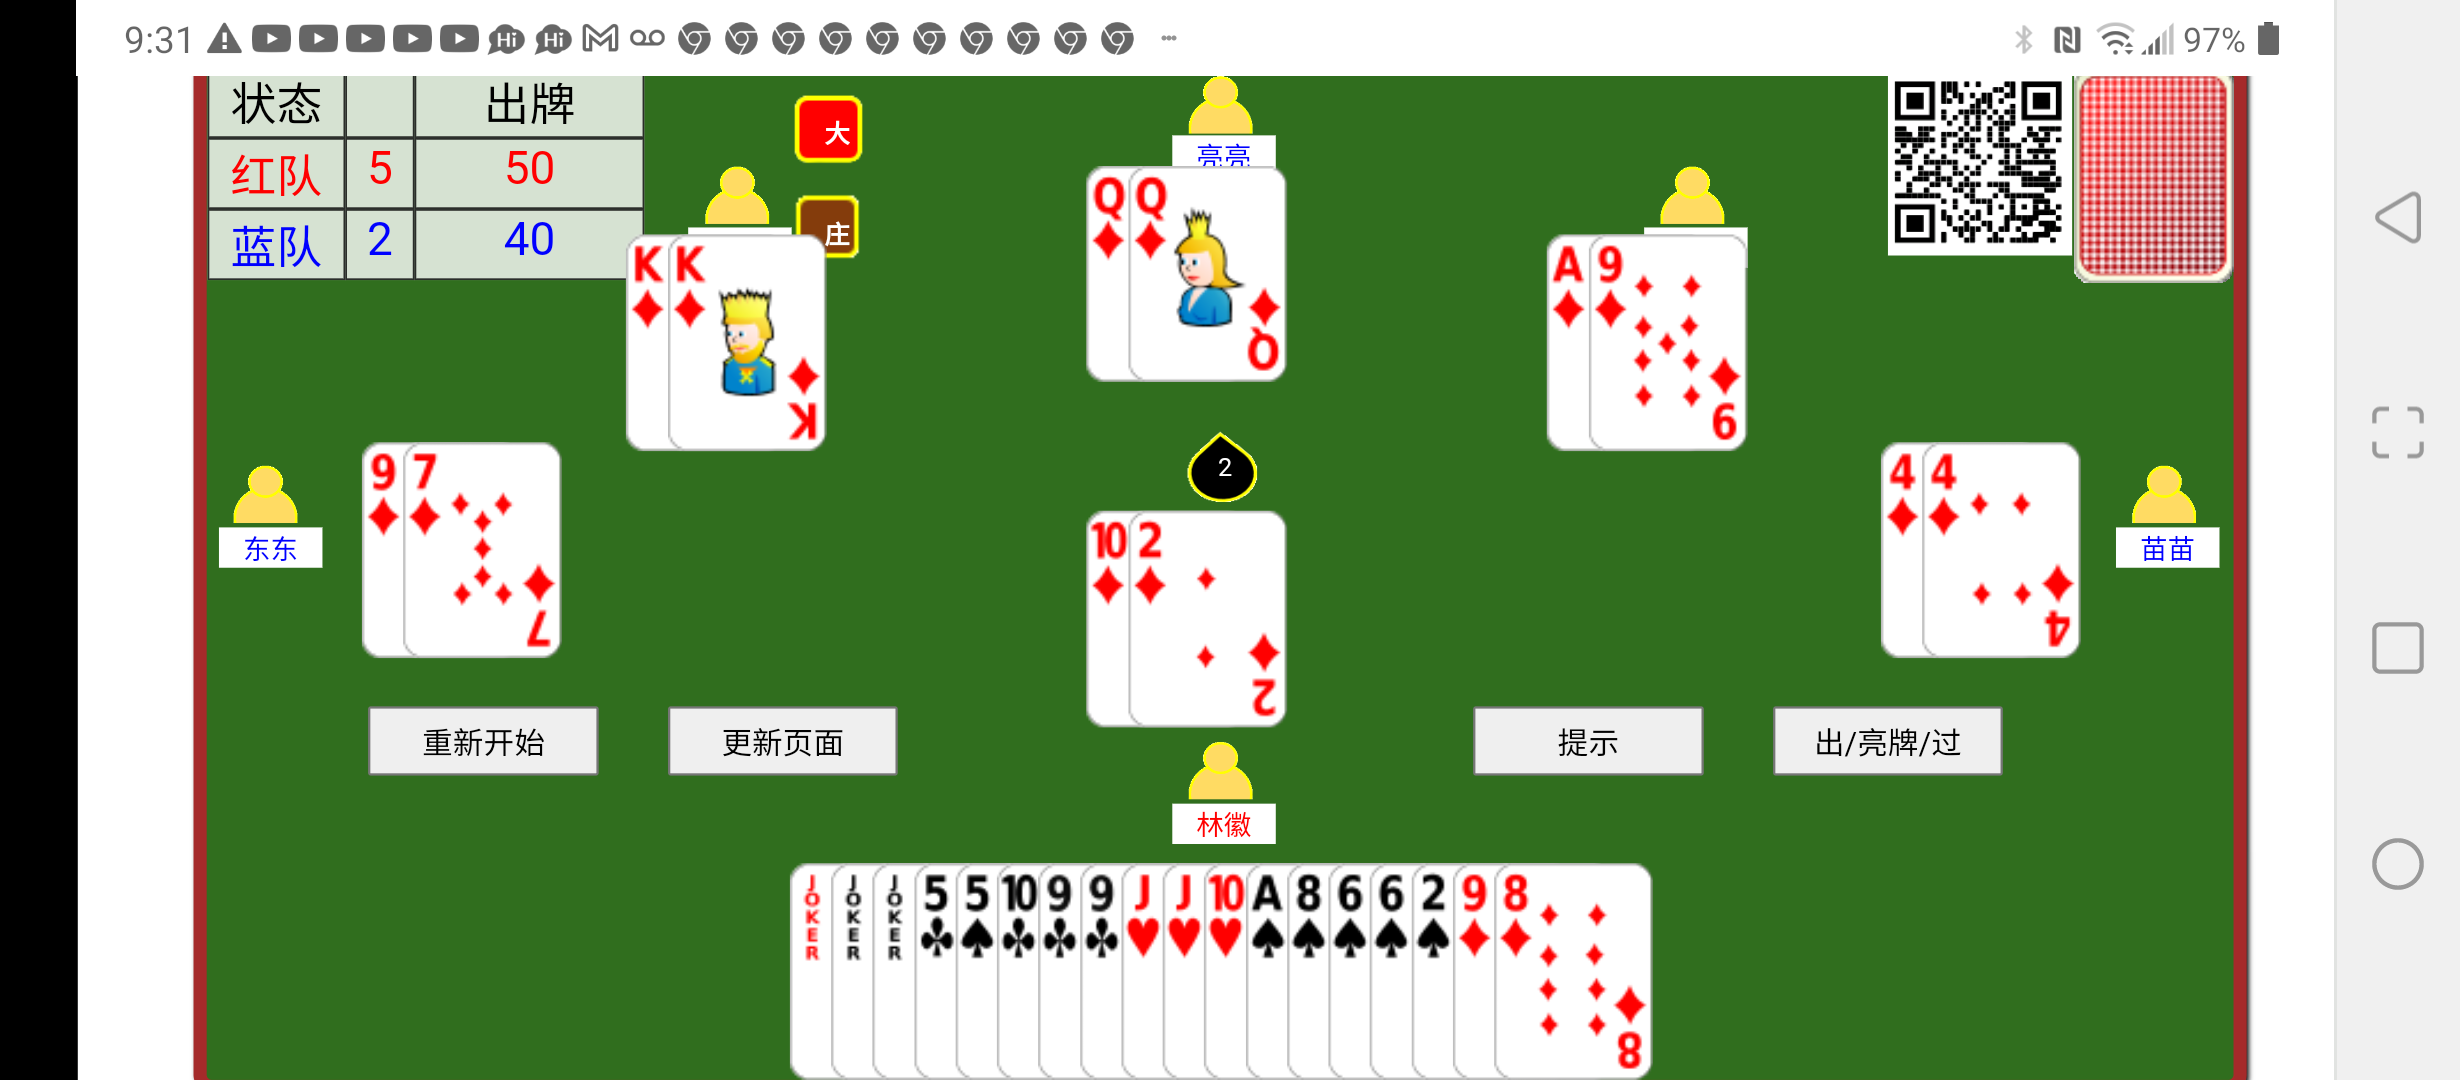 html5 tractor card game Screenshot_20220116-093103.png